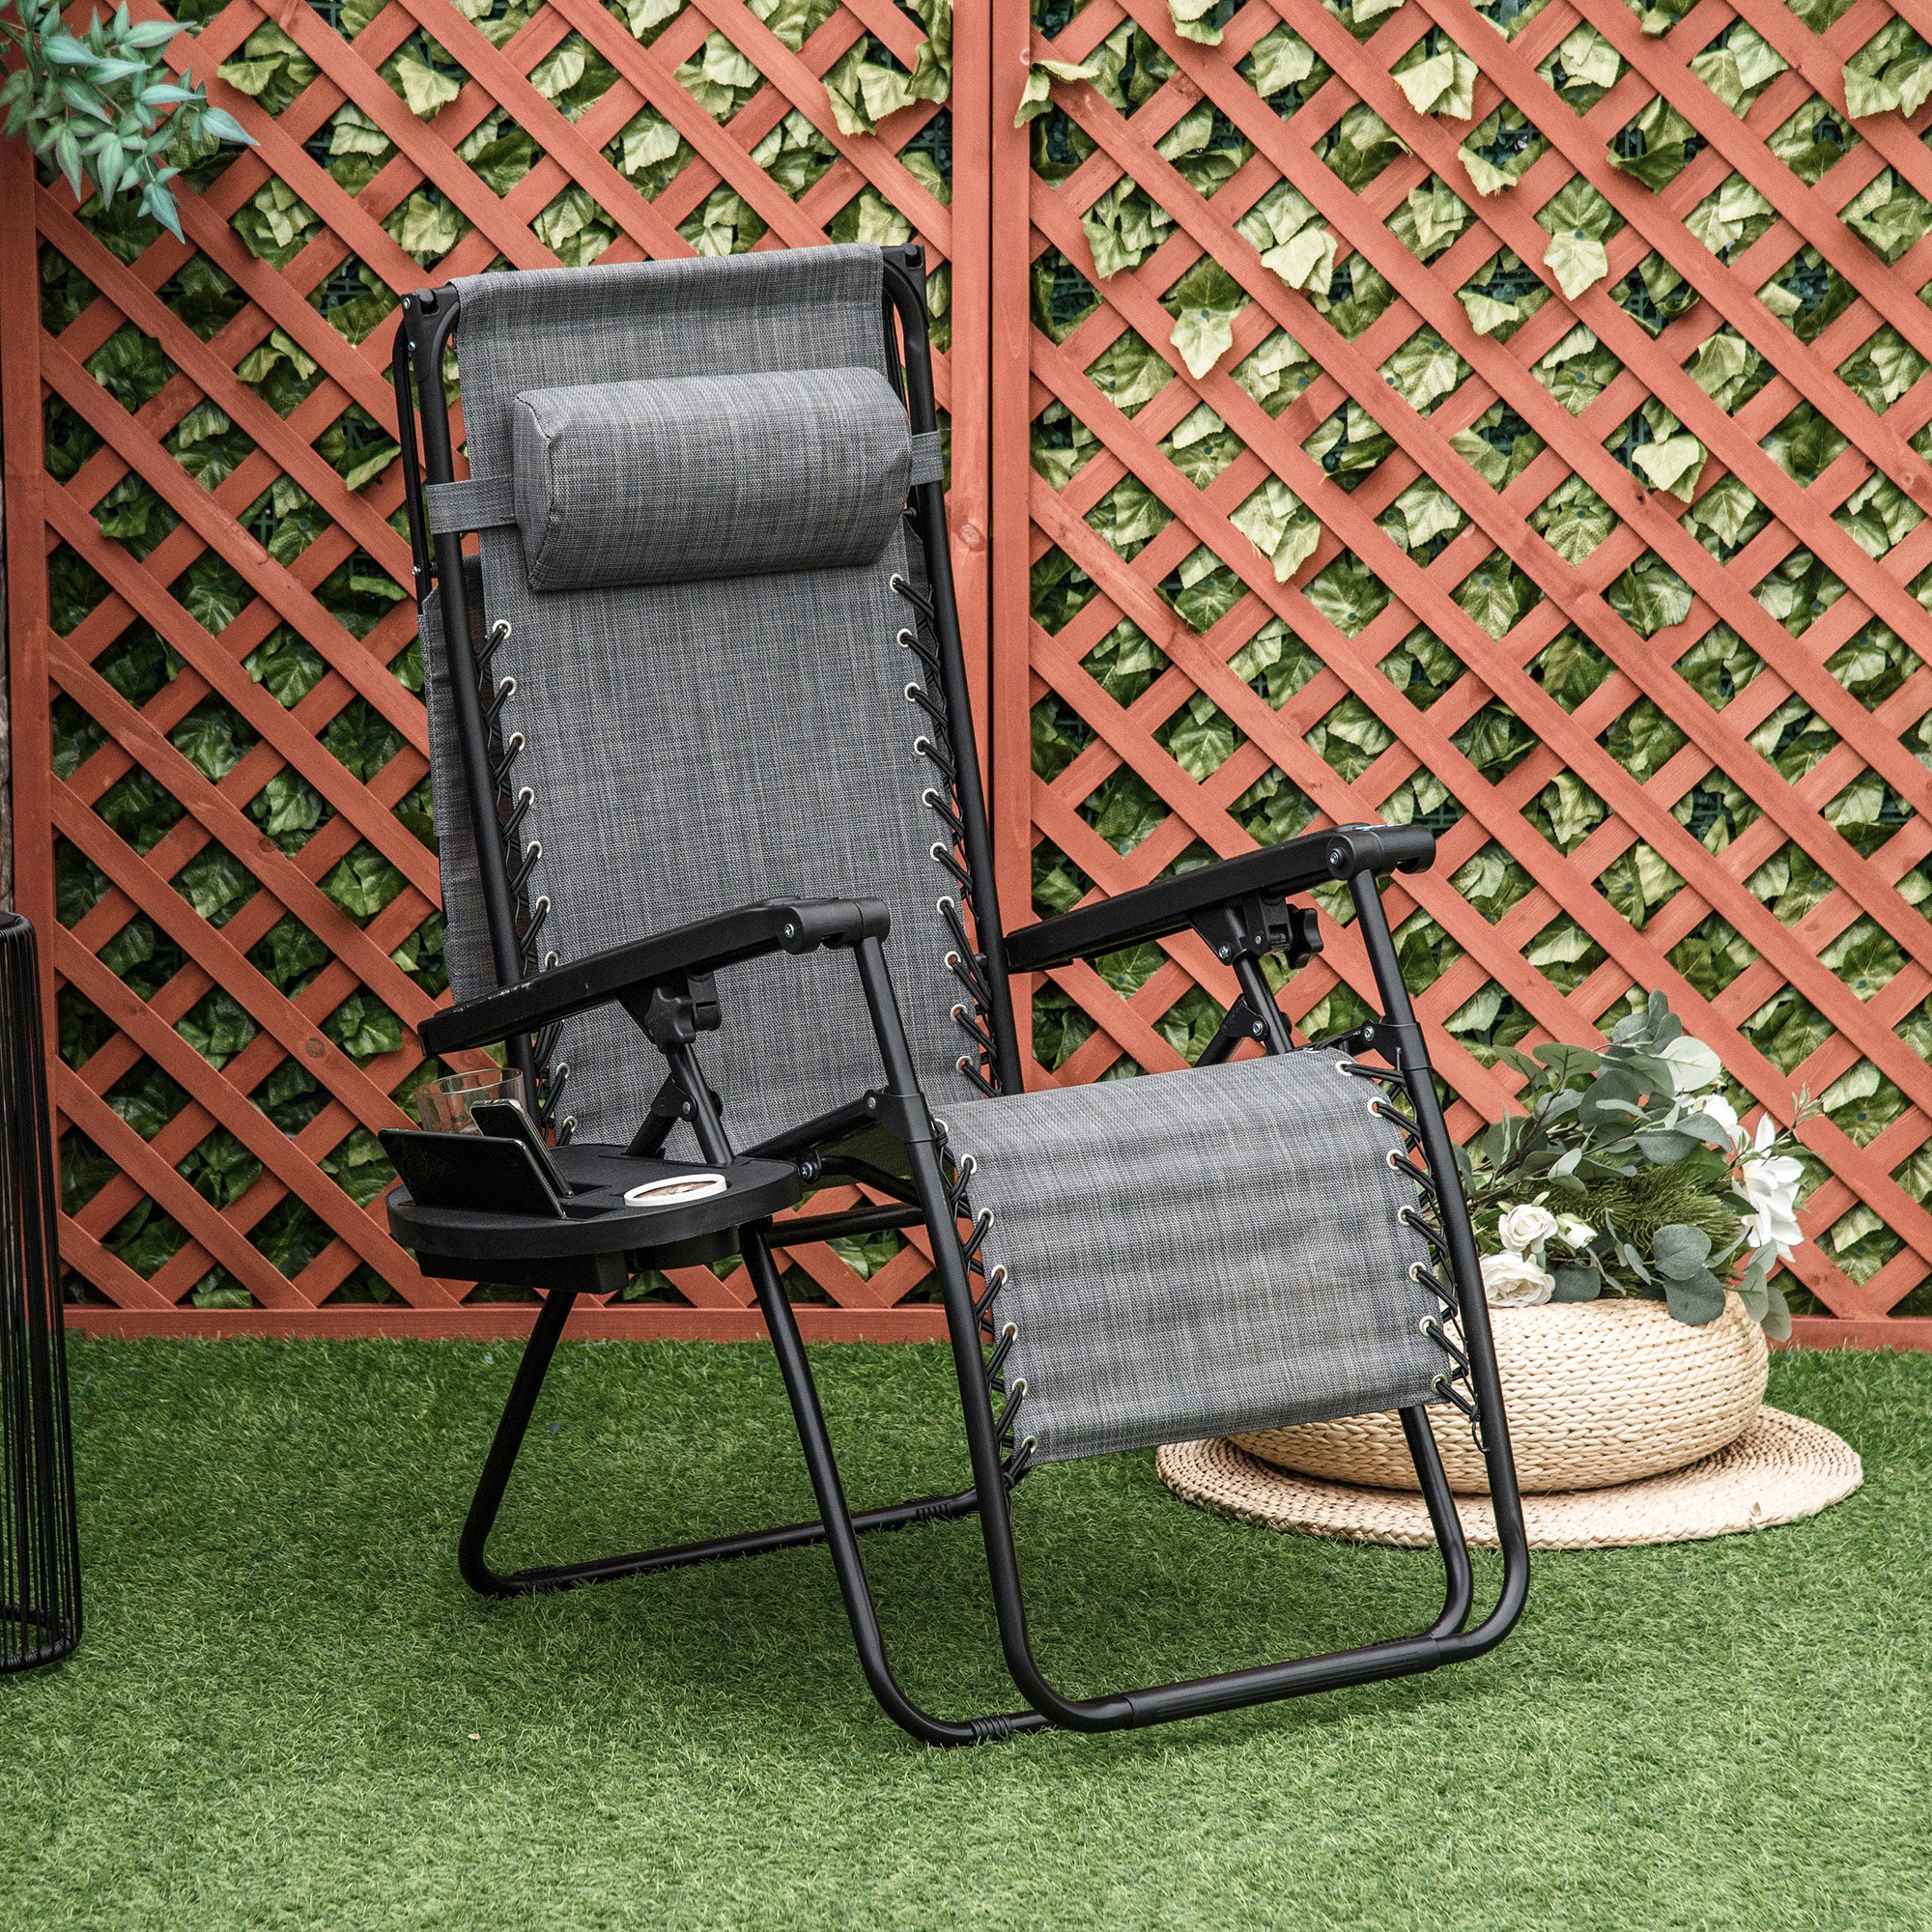 Outsunny Zero Gravity Garden Deck Folding Chair Patio Sun Lounger Reclining Seat with Cup Holder & Canopy Shade - Grey - Inspirely